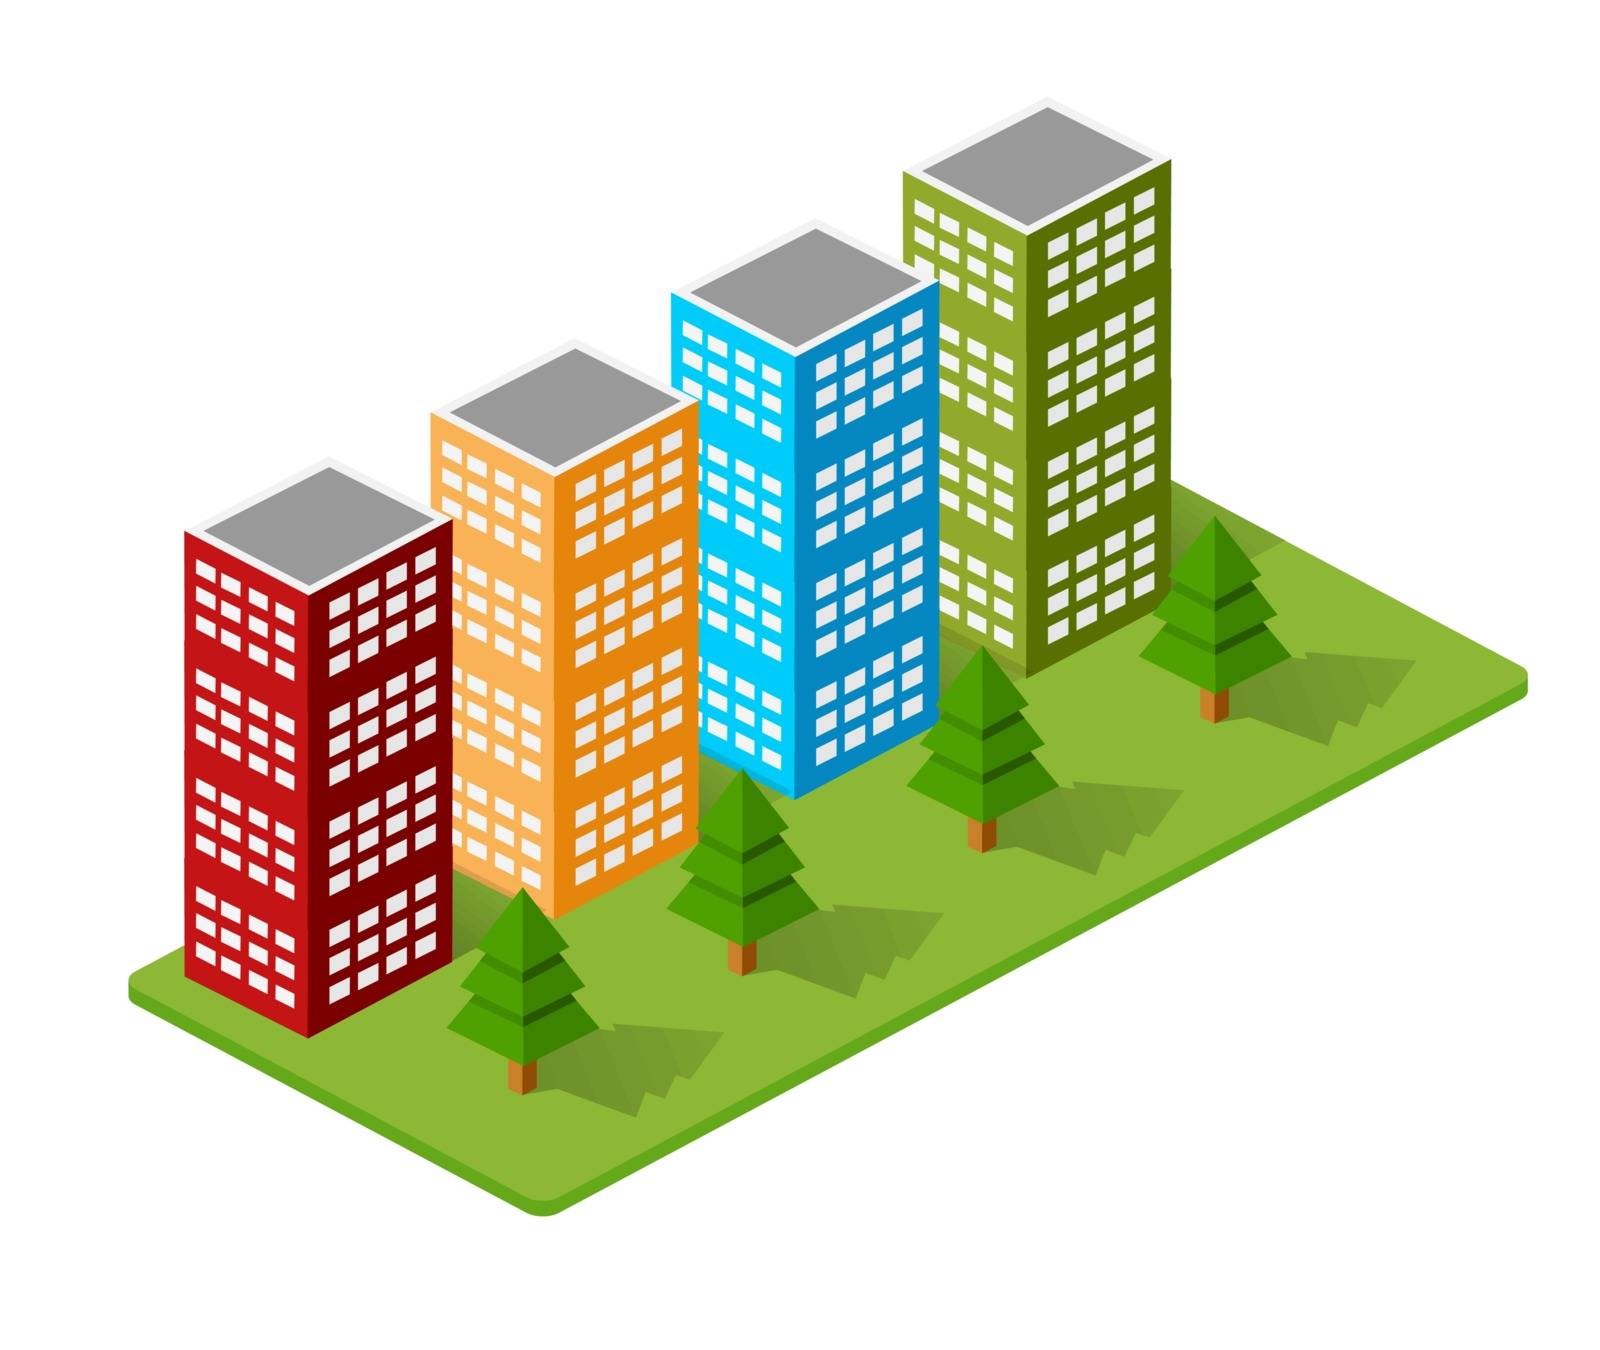 Isometric houses, town houses, skyscrapers and streets made in perspective projection for design sites, business portals and real estate agencies